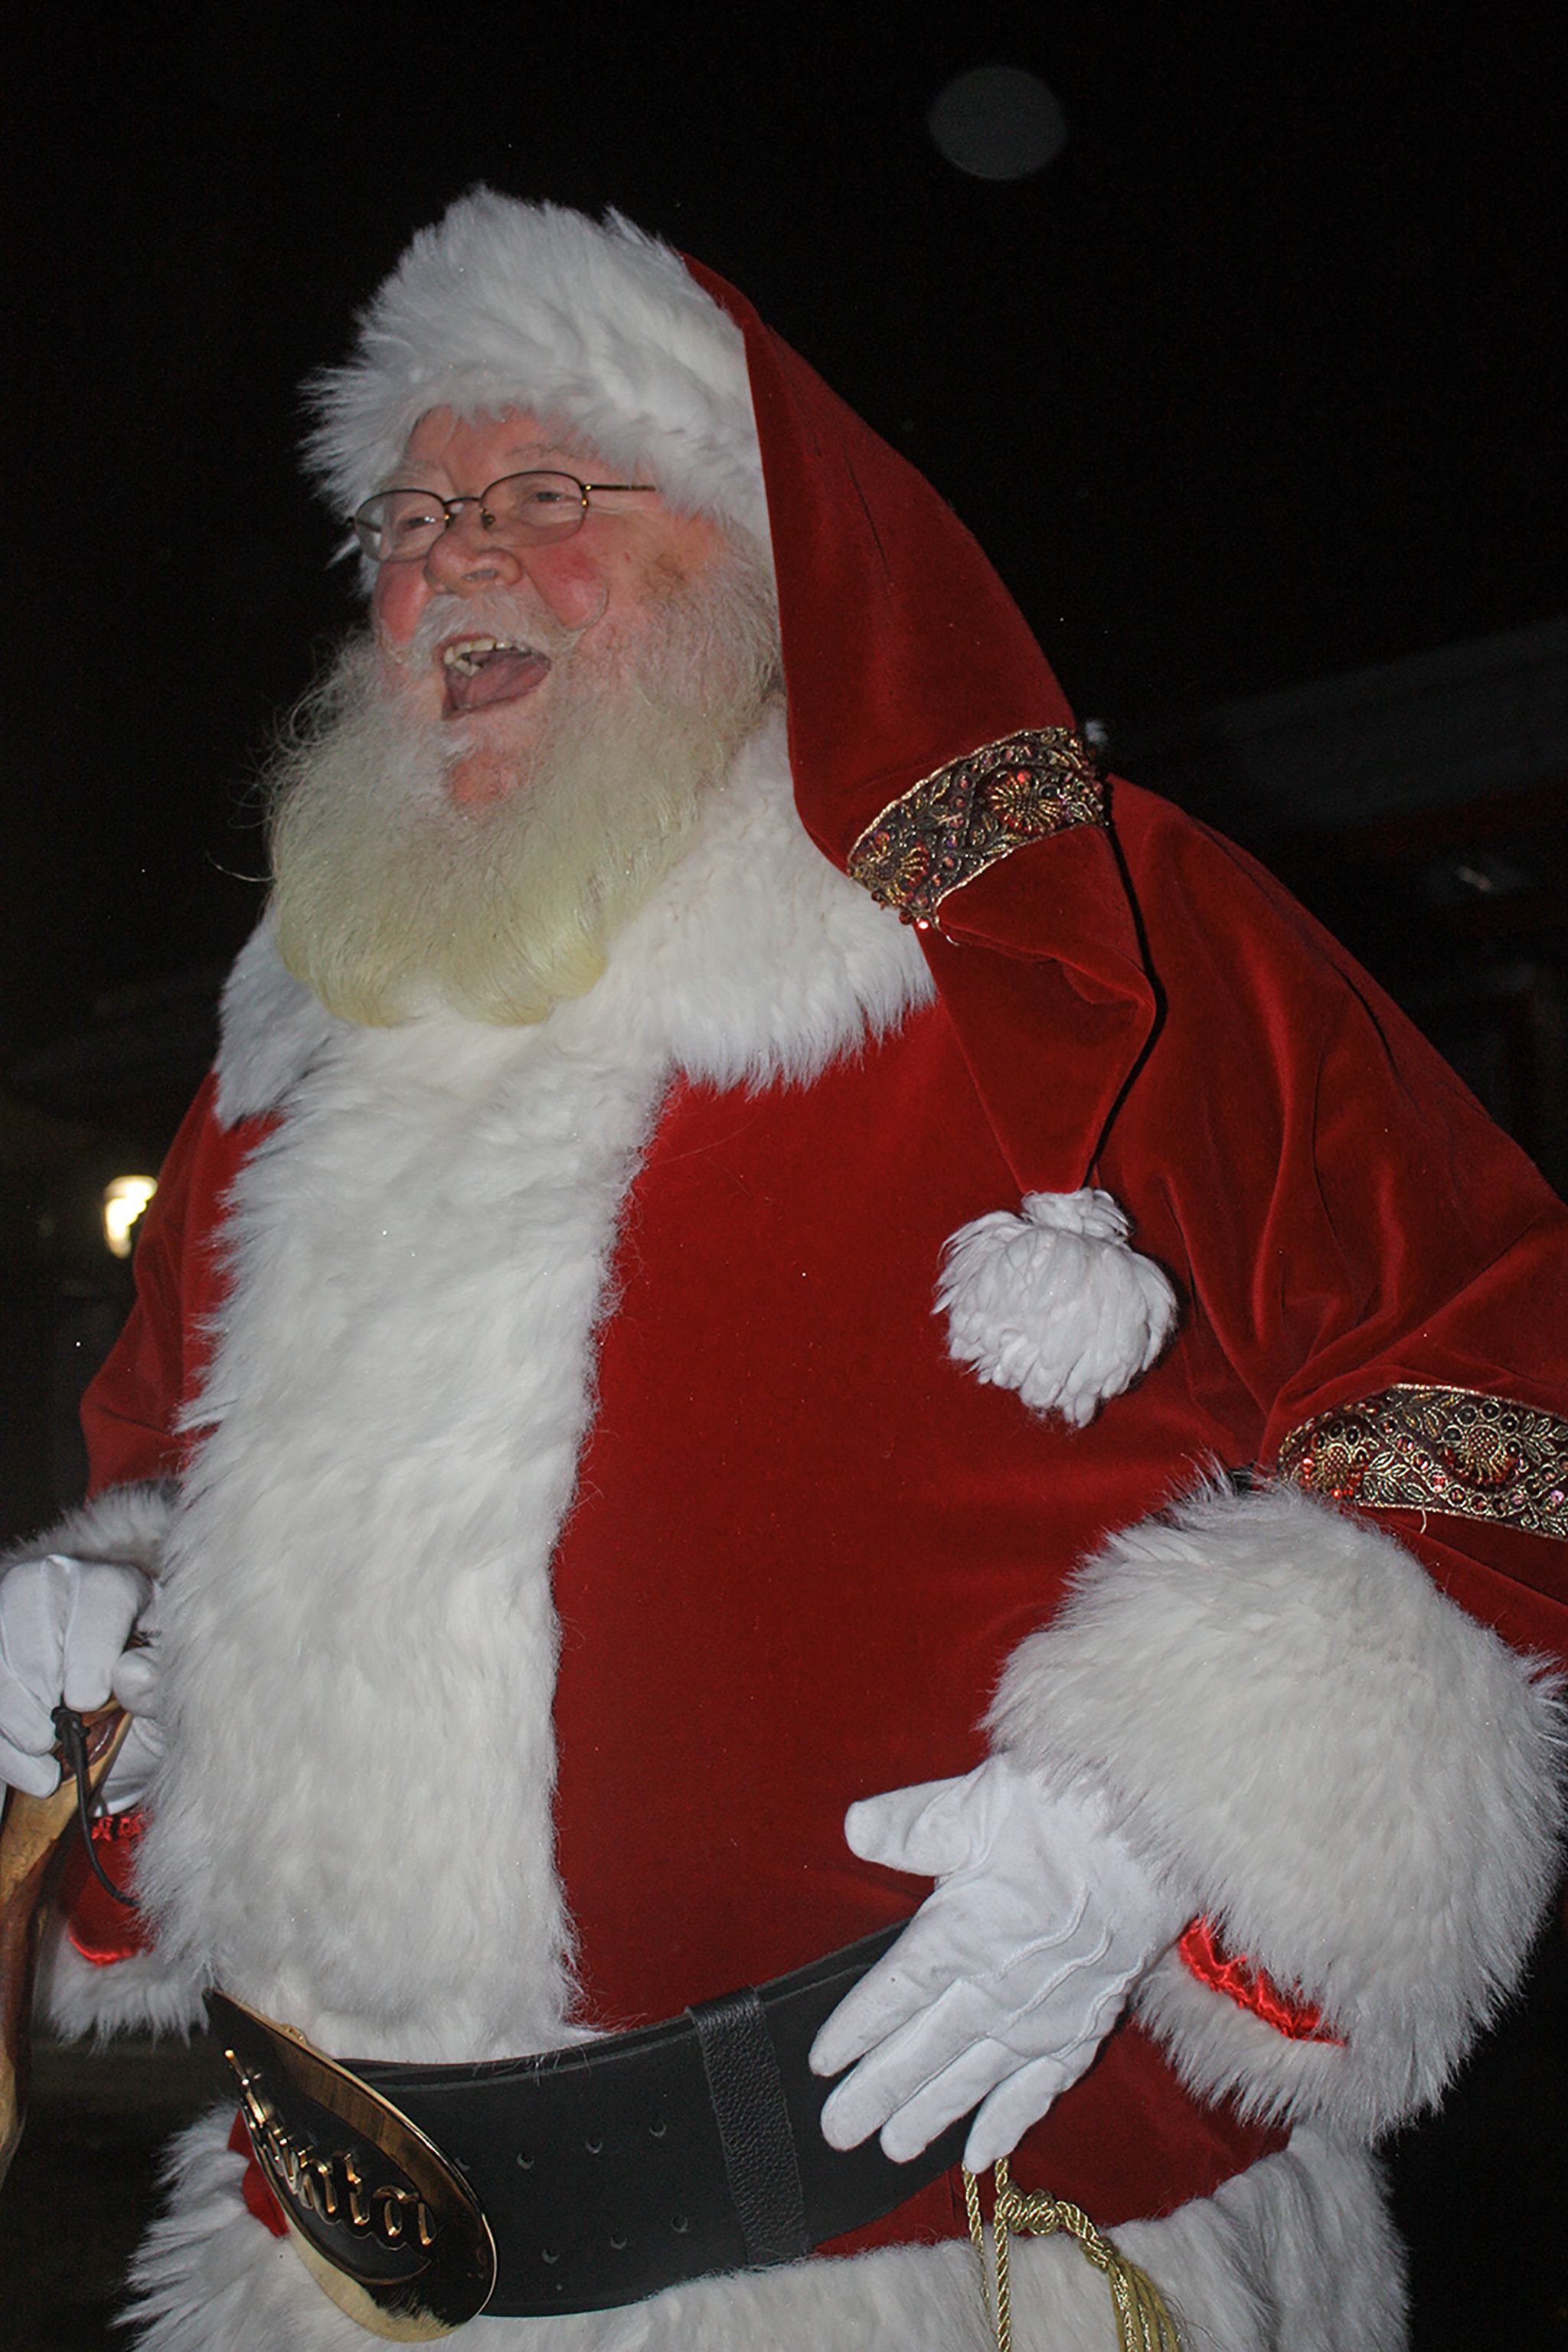 Santa Claus arrives by fire truck, greeting children and families during Winterfest at the Town Square Plaza on Saturday. MARK KLAAS, Kent Reporter